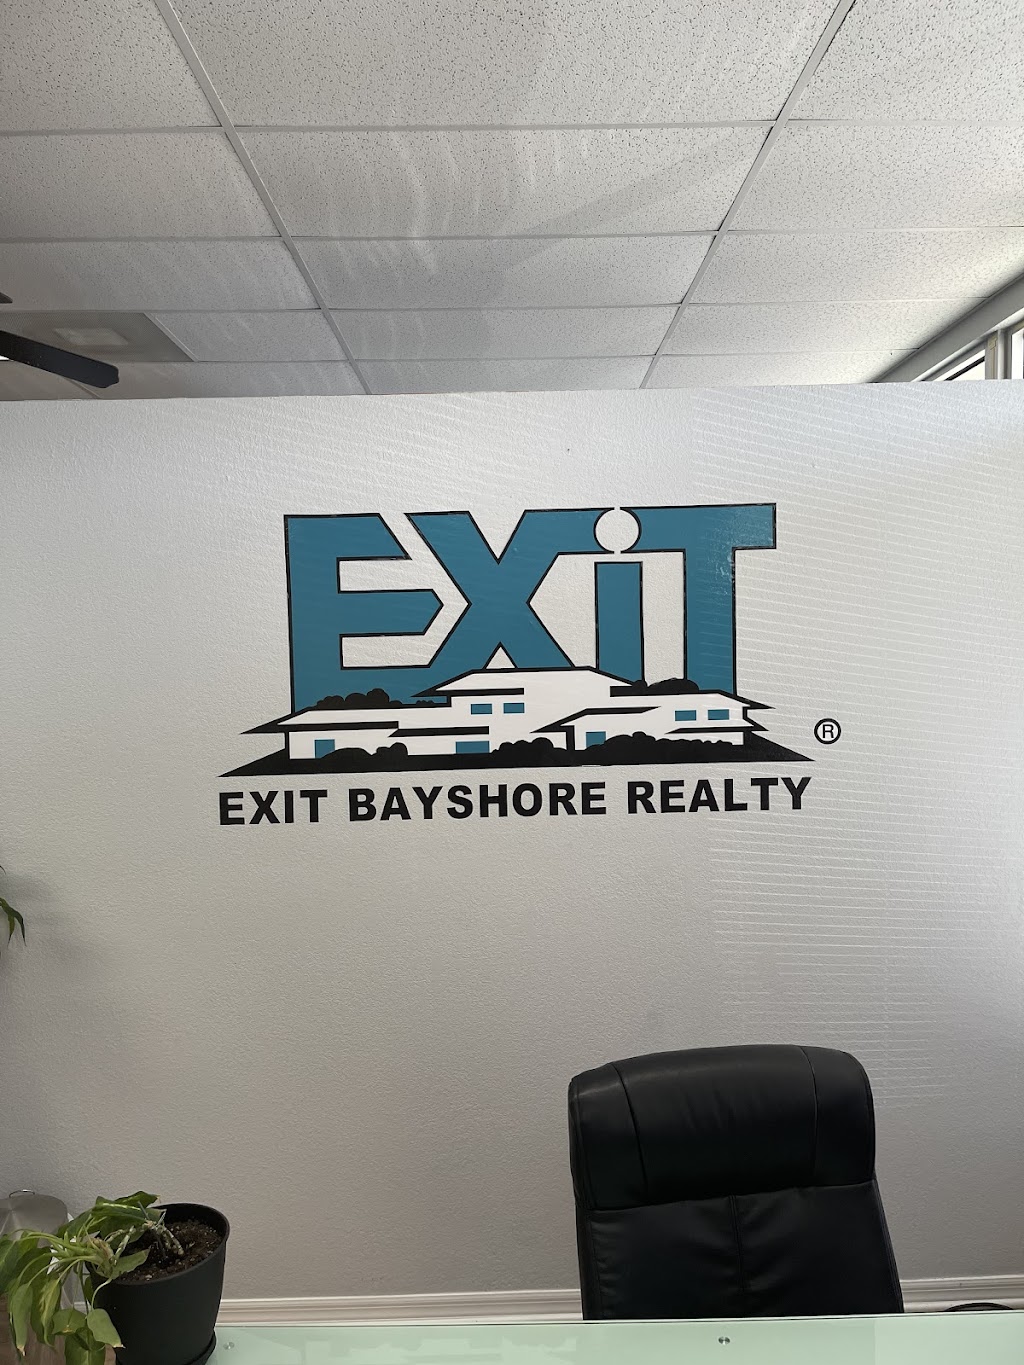 EXIT Bayshore Realty | 5801 S Dale Mabry Hwy, Tampa, FL 33611, USA | Phone: (813) 839-6869